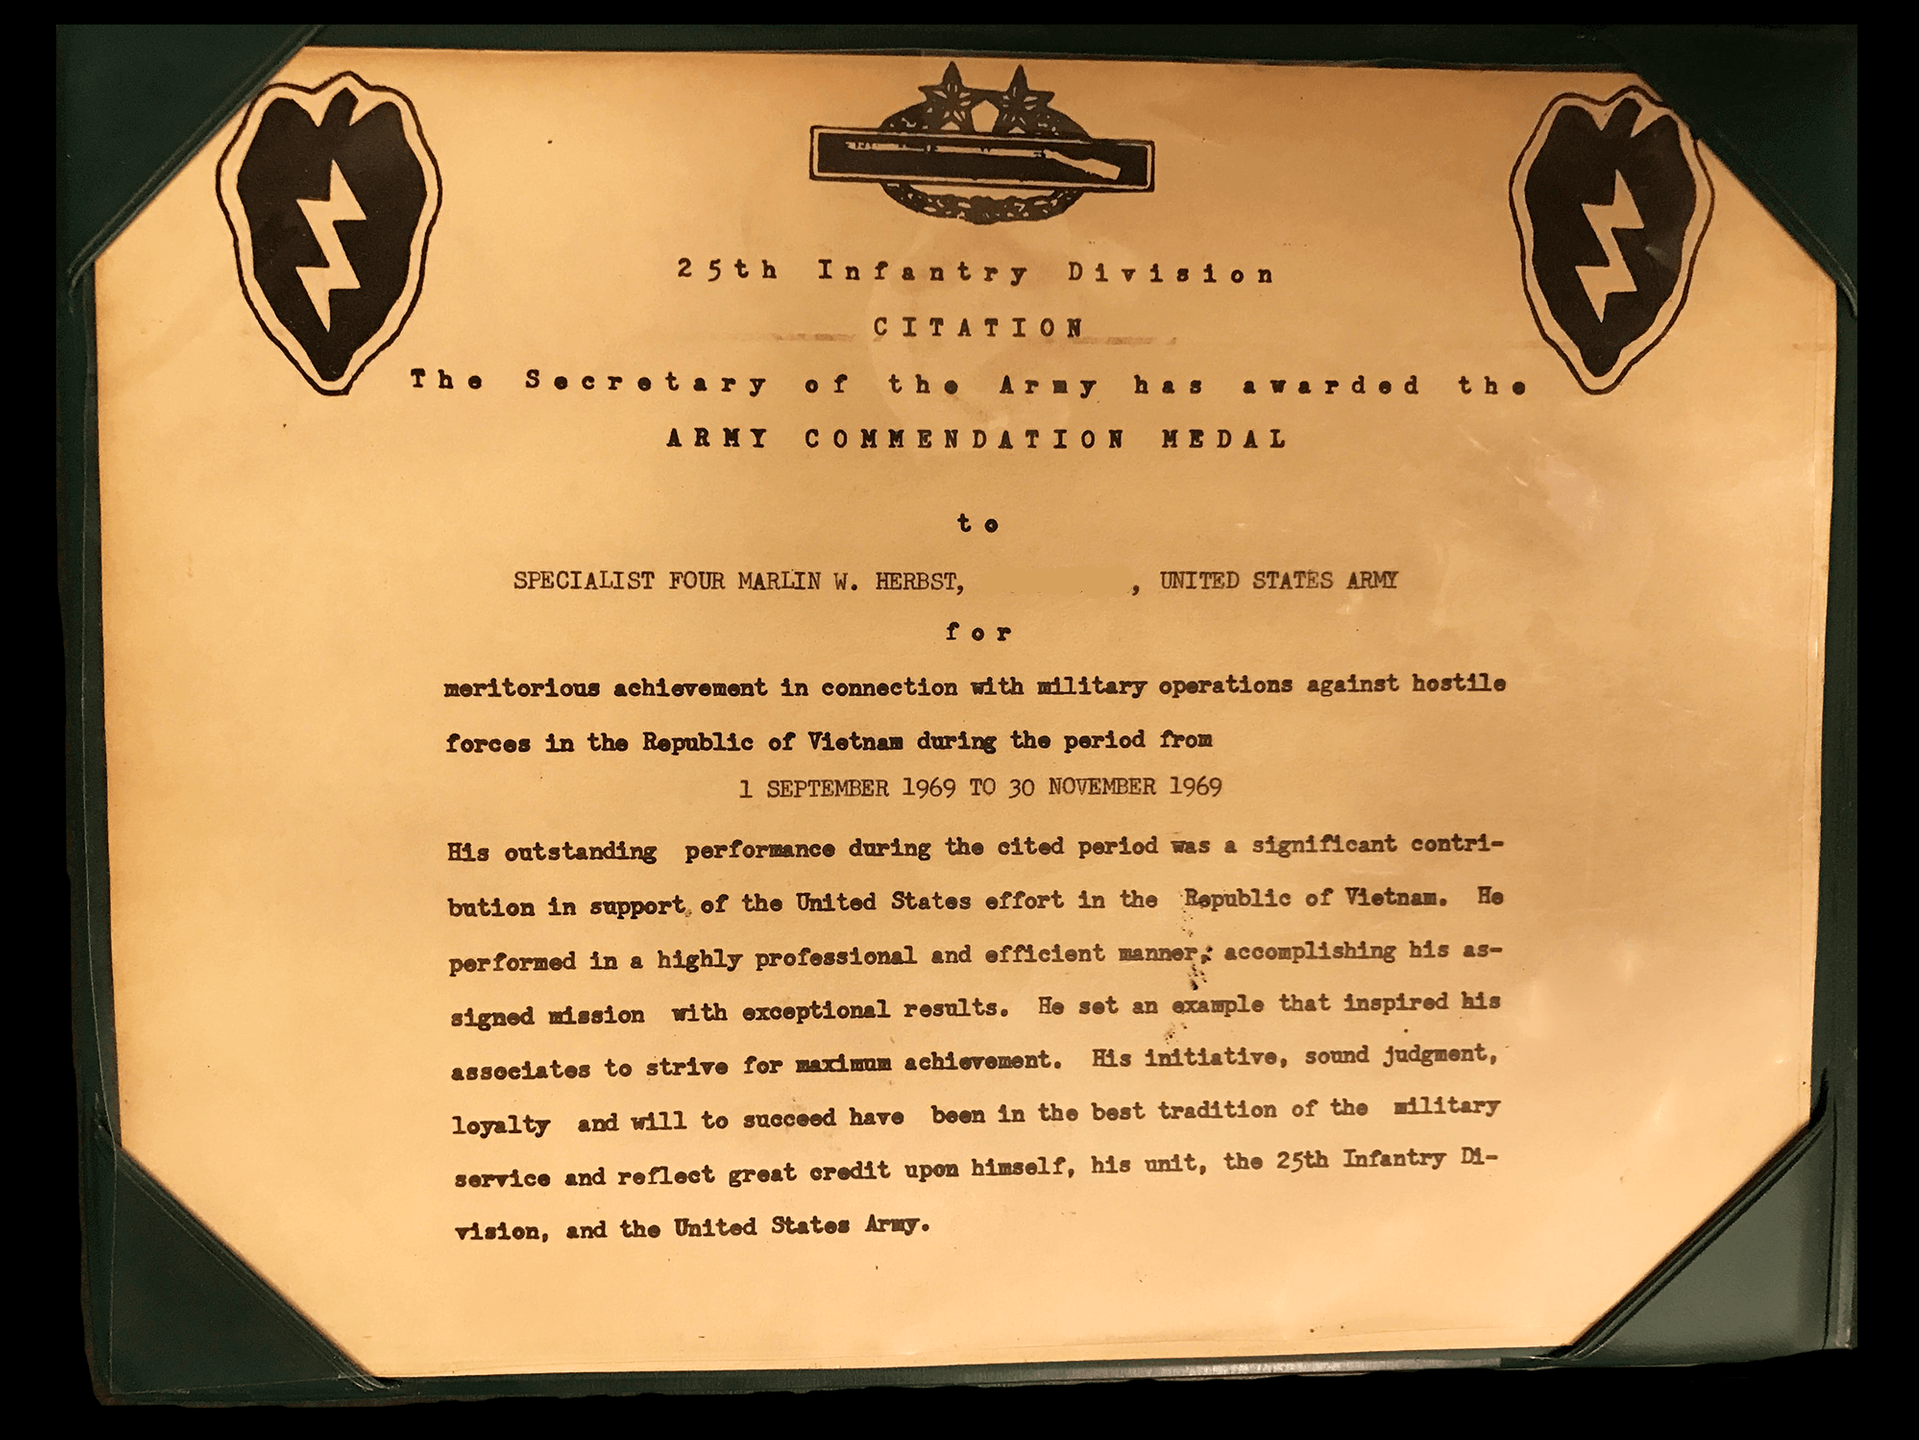 Citation for an Army Commendation, presented to Marlin Herbst for period of 9-1-1969 through 11-30-1969.